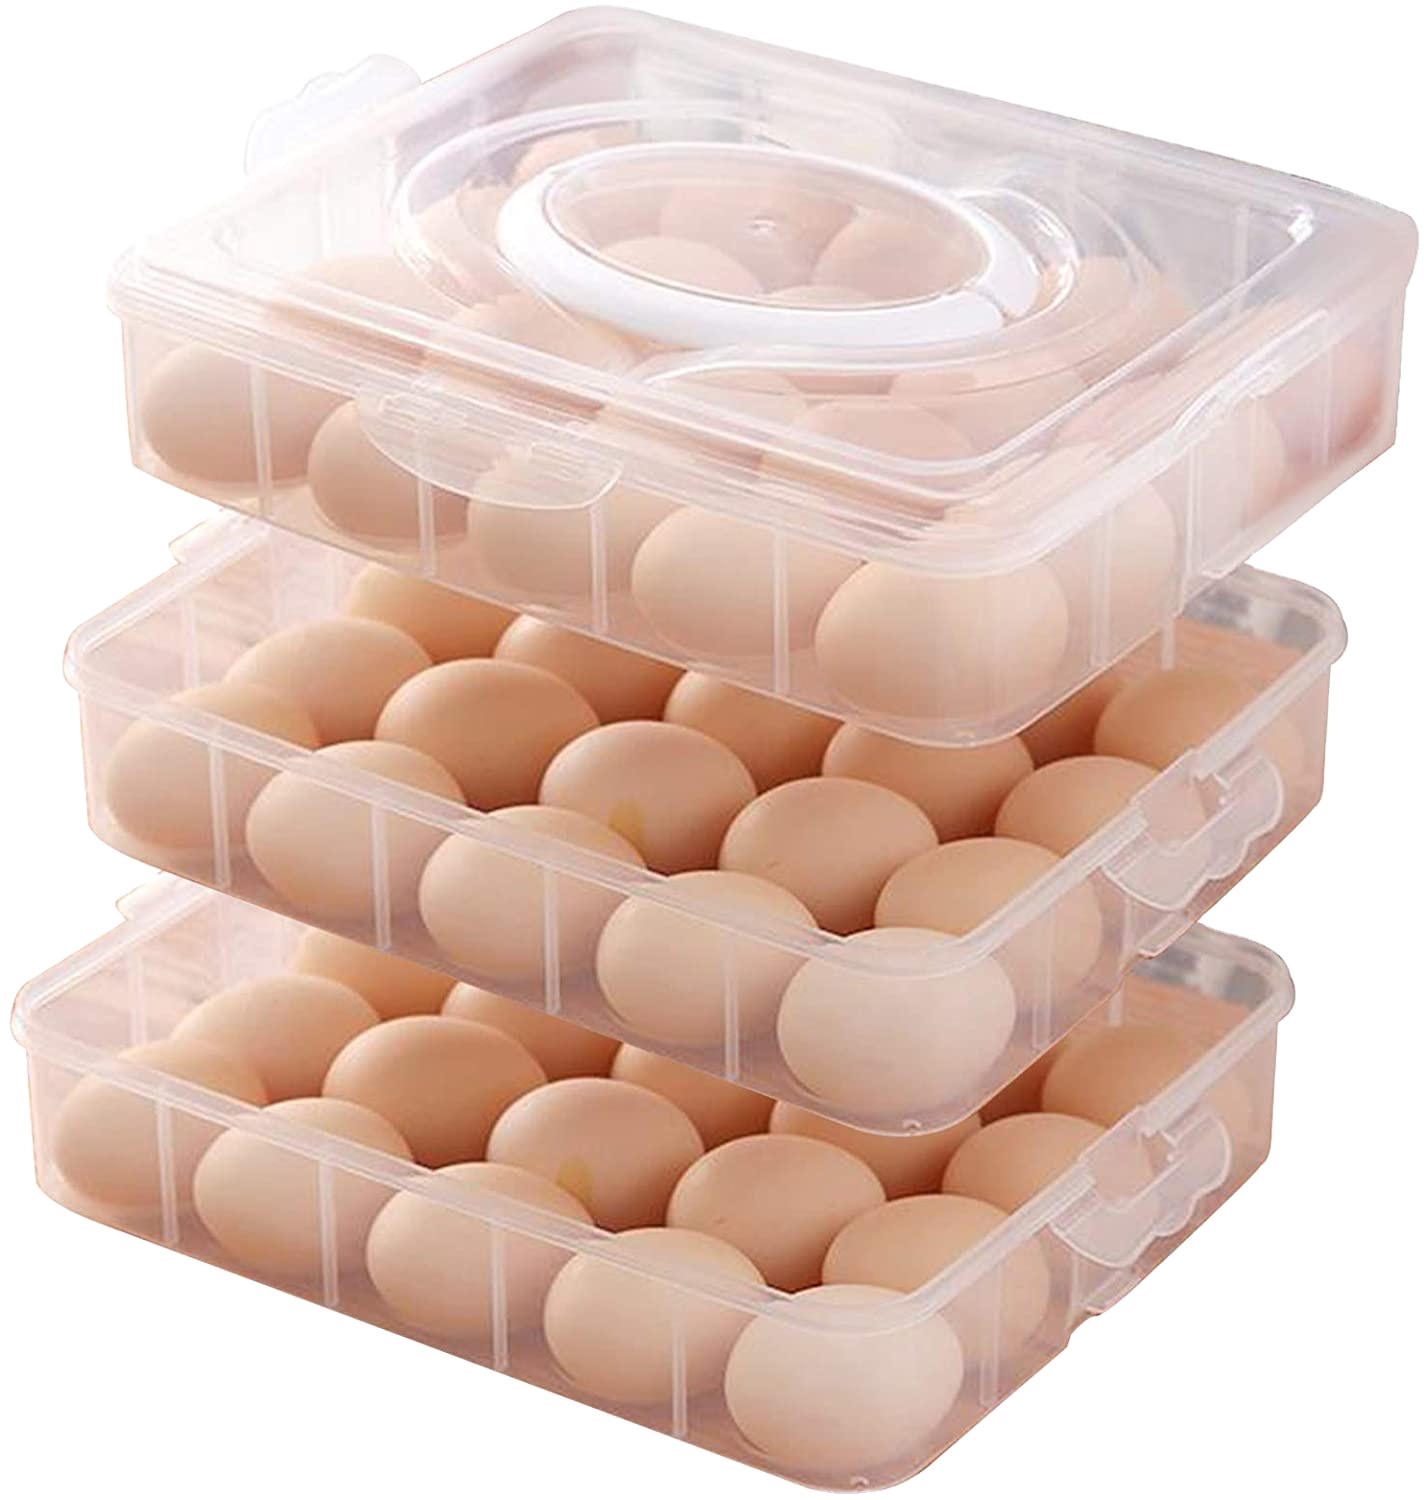 3-Layer Snap and Stack Egg Holder, Kitchenware